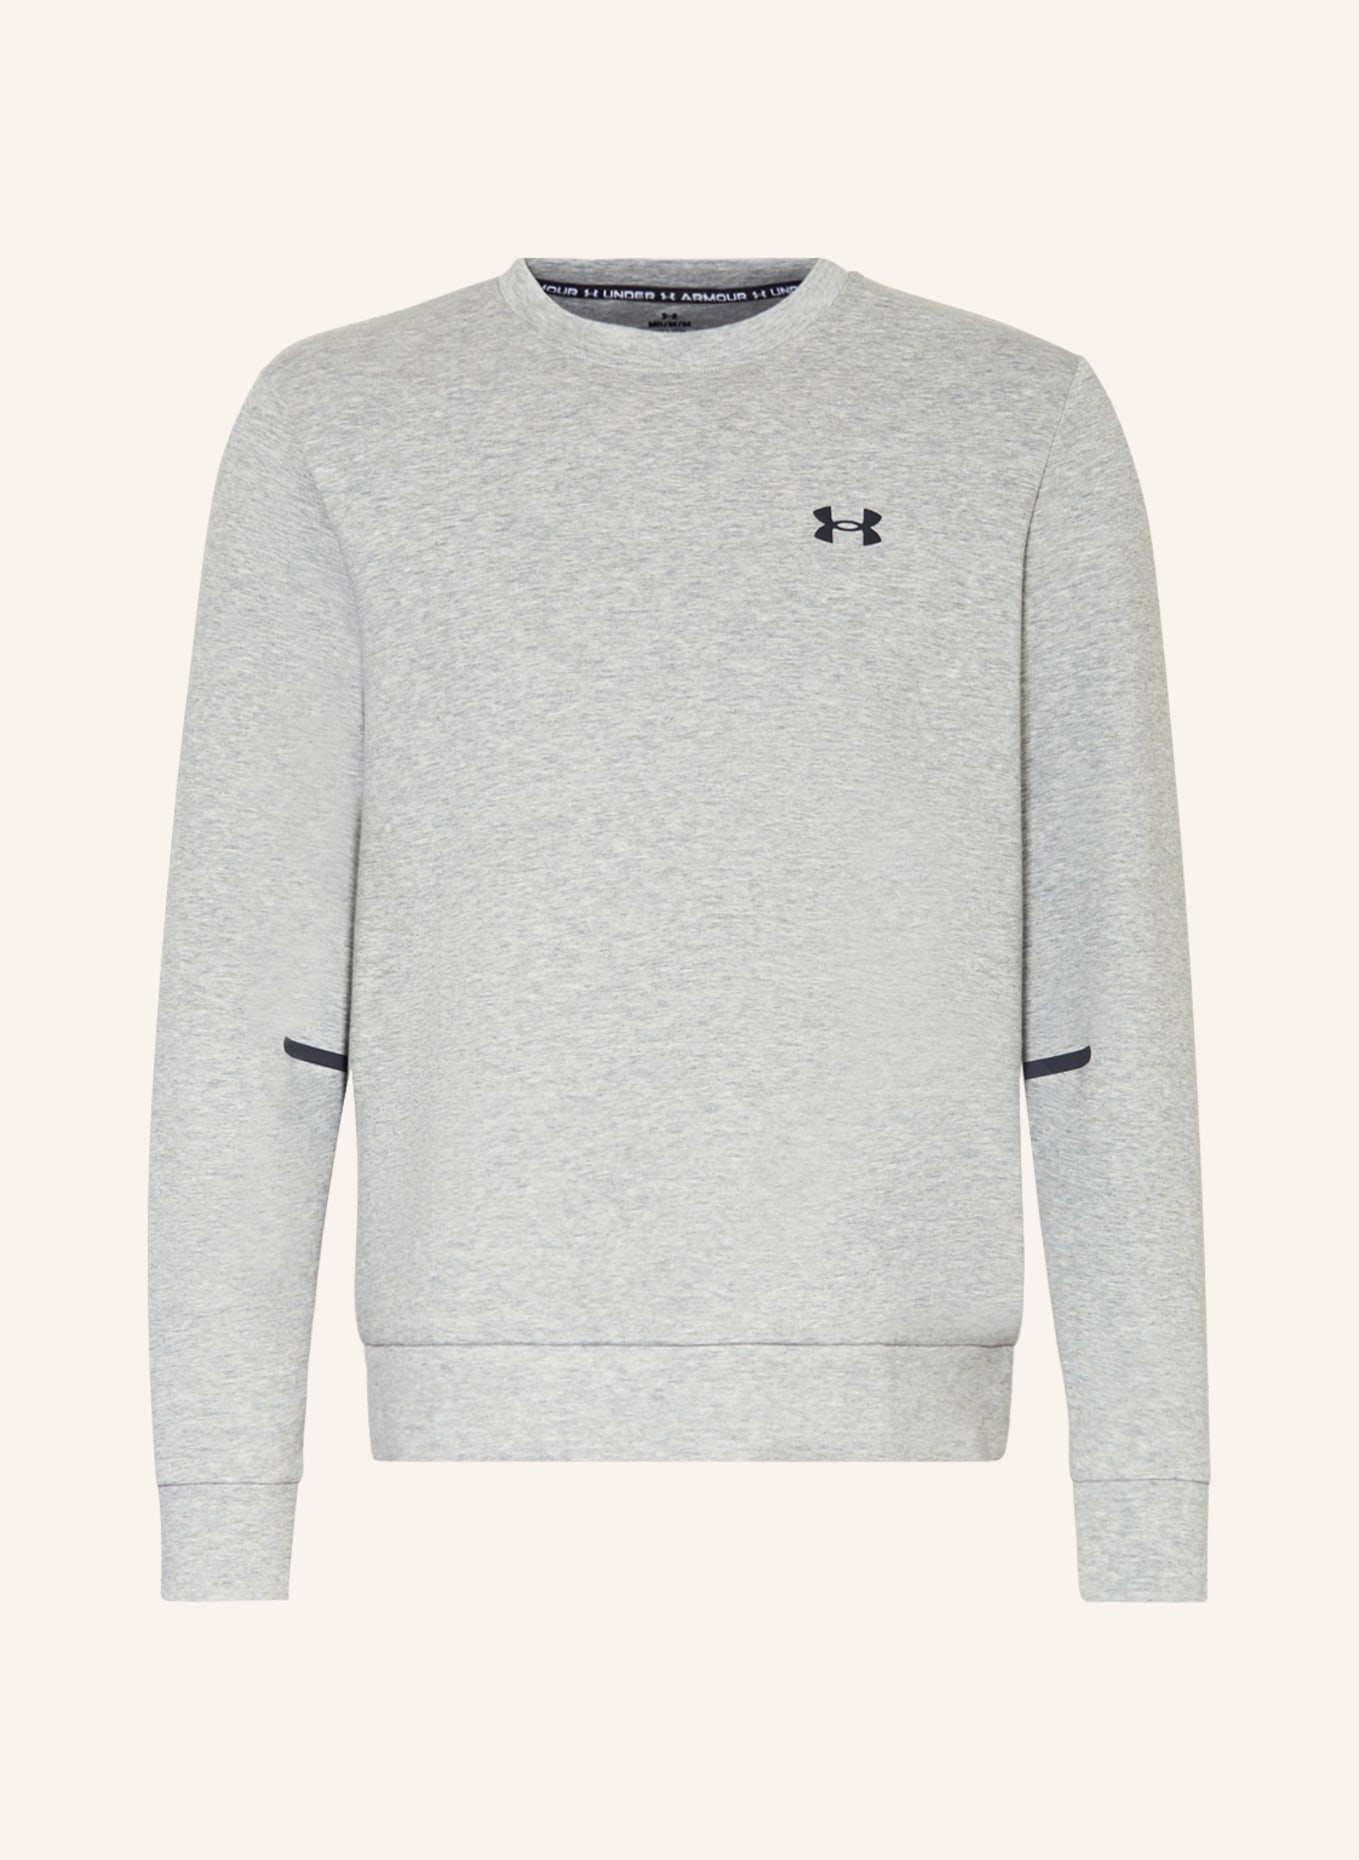 UNDER ARMOUR Sweatshirt UA UNSTOPPABLE in light gray